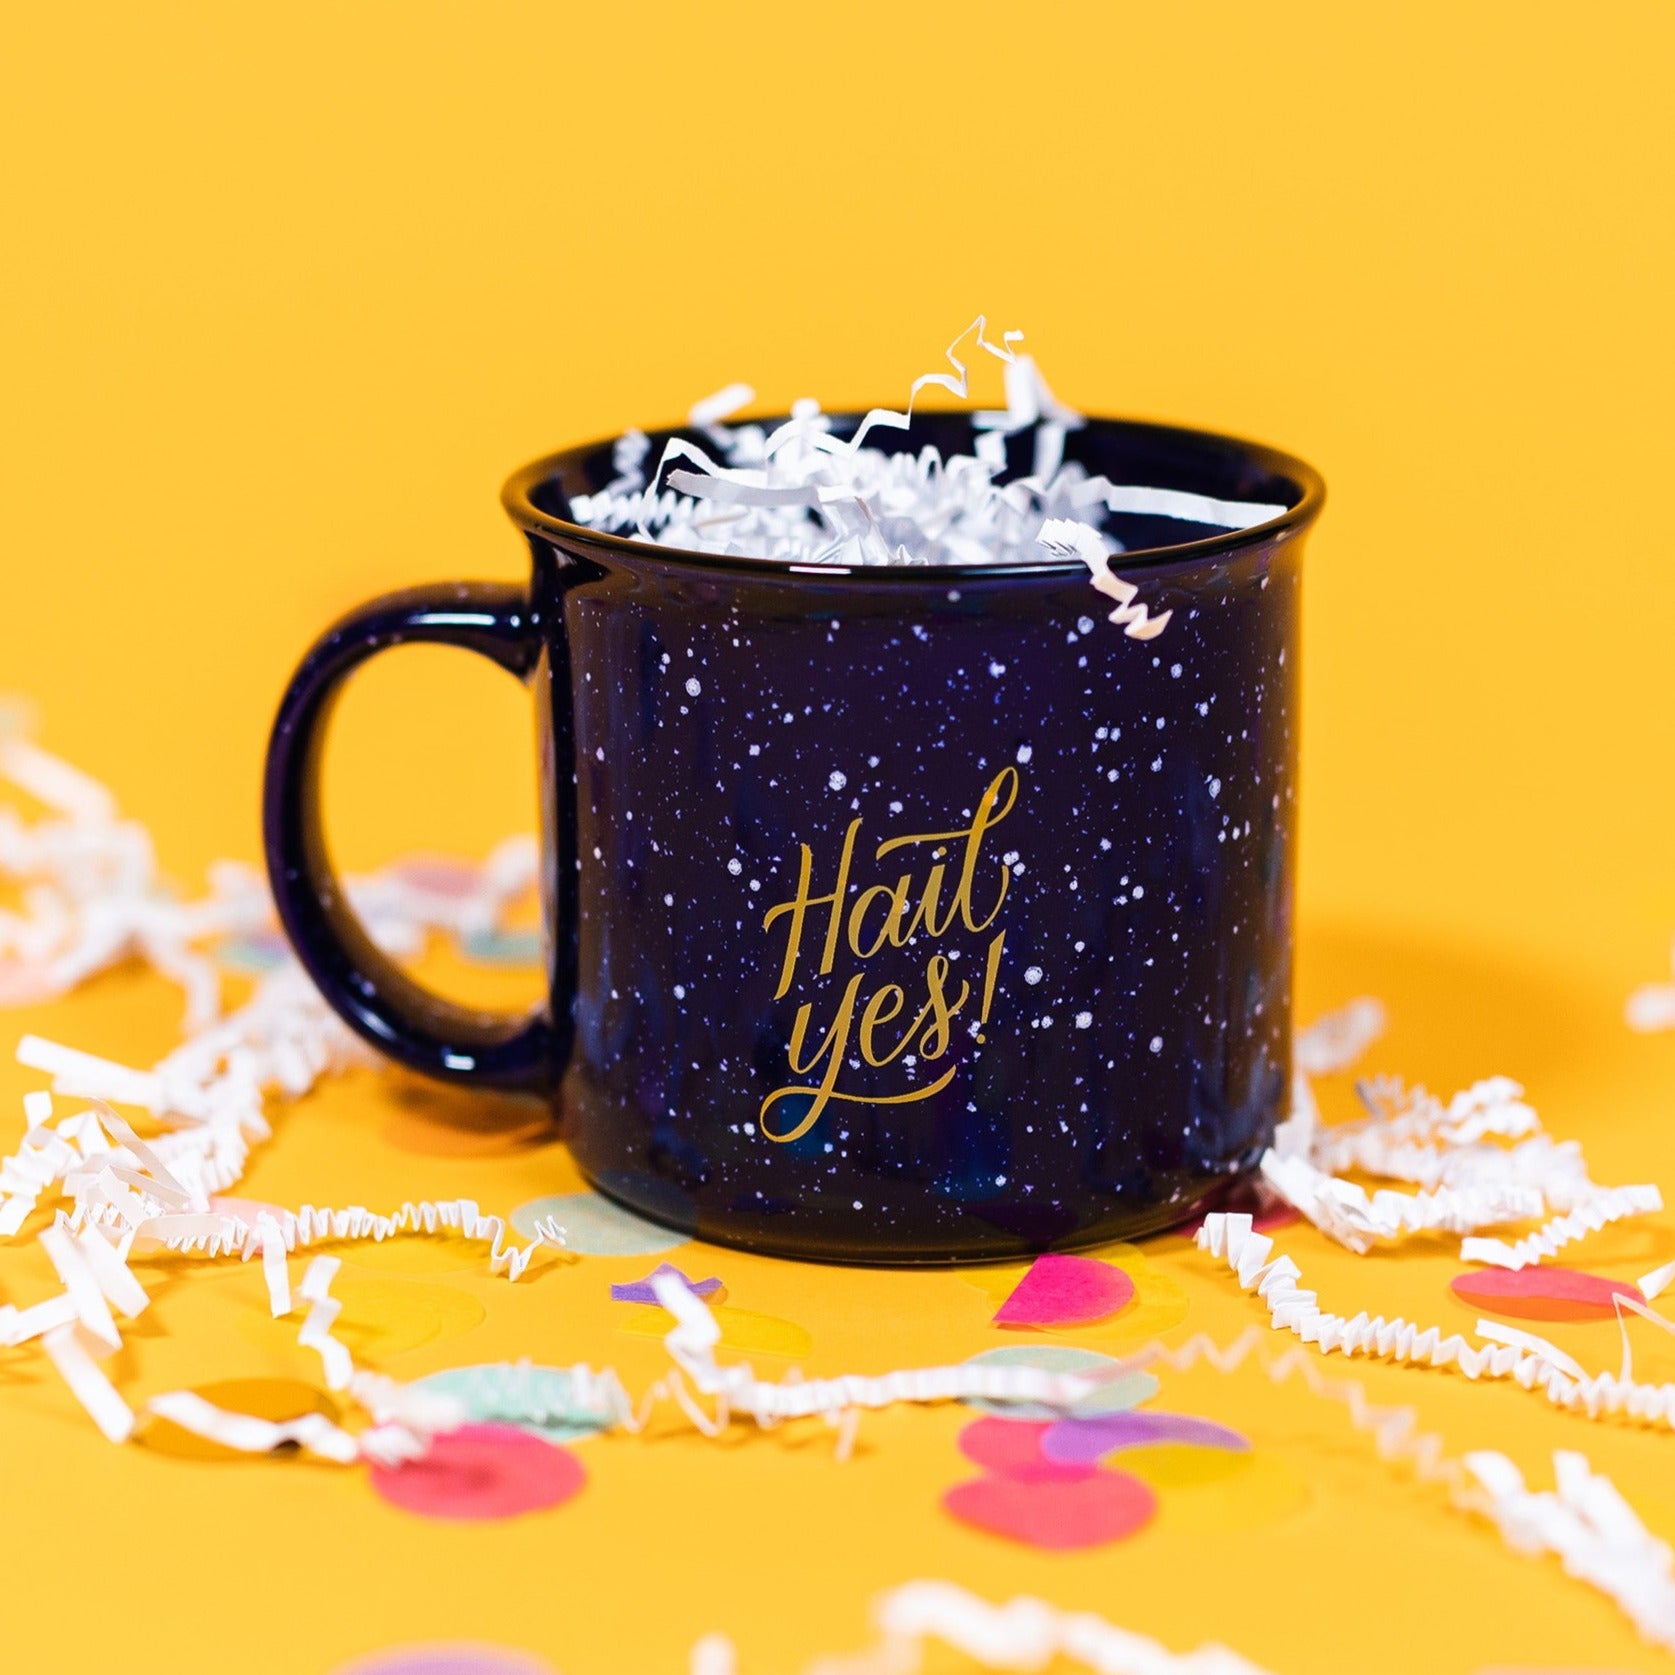 On a sunny mustard background sits a mug with white crinkle and big, colorful confetti scattered around. The mug is a navy blue campfire style mug with white splatter pattern. On the mug is a mustard yellow script font that says "Hail Yes!" and it is filled with white crinkle.